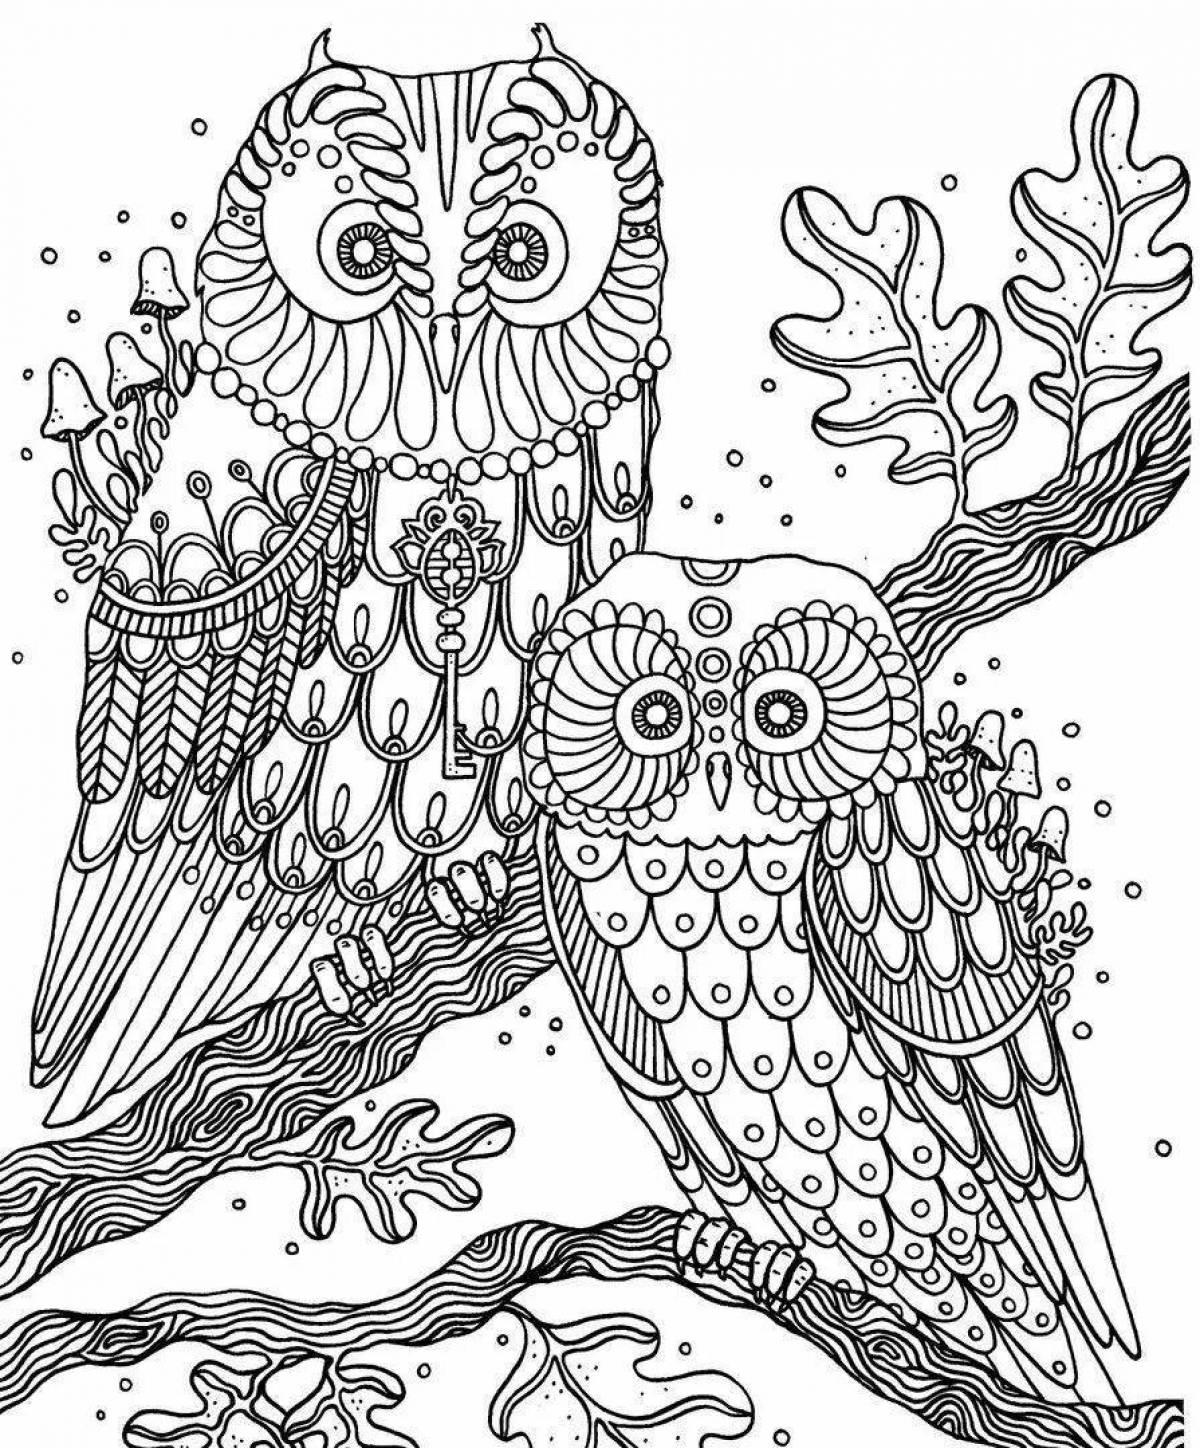 Fun owl coloring pages